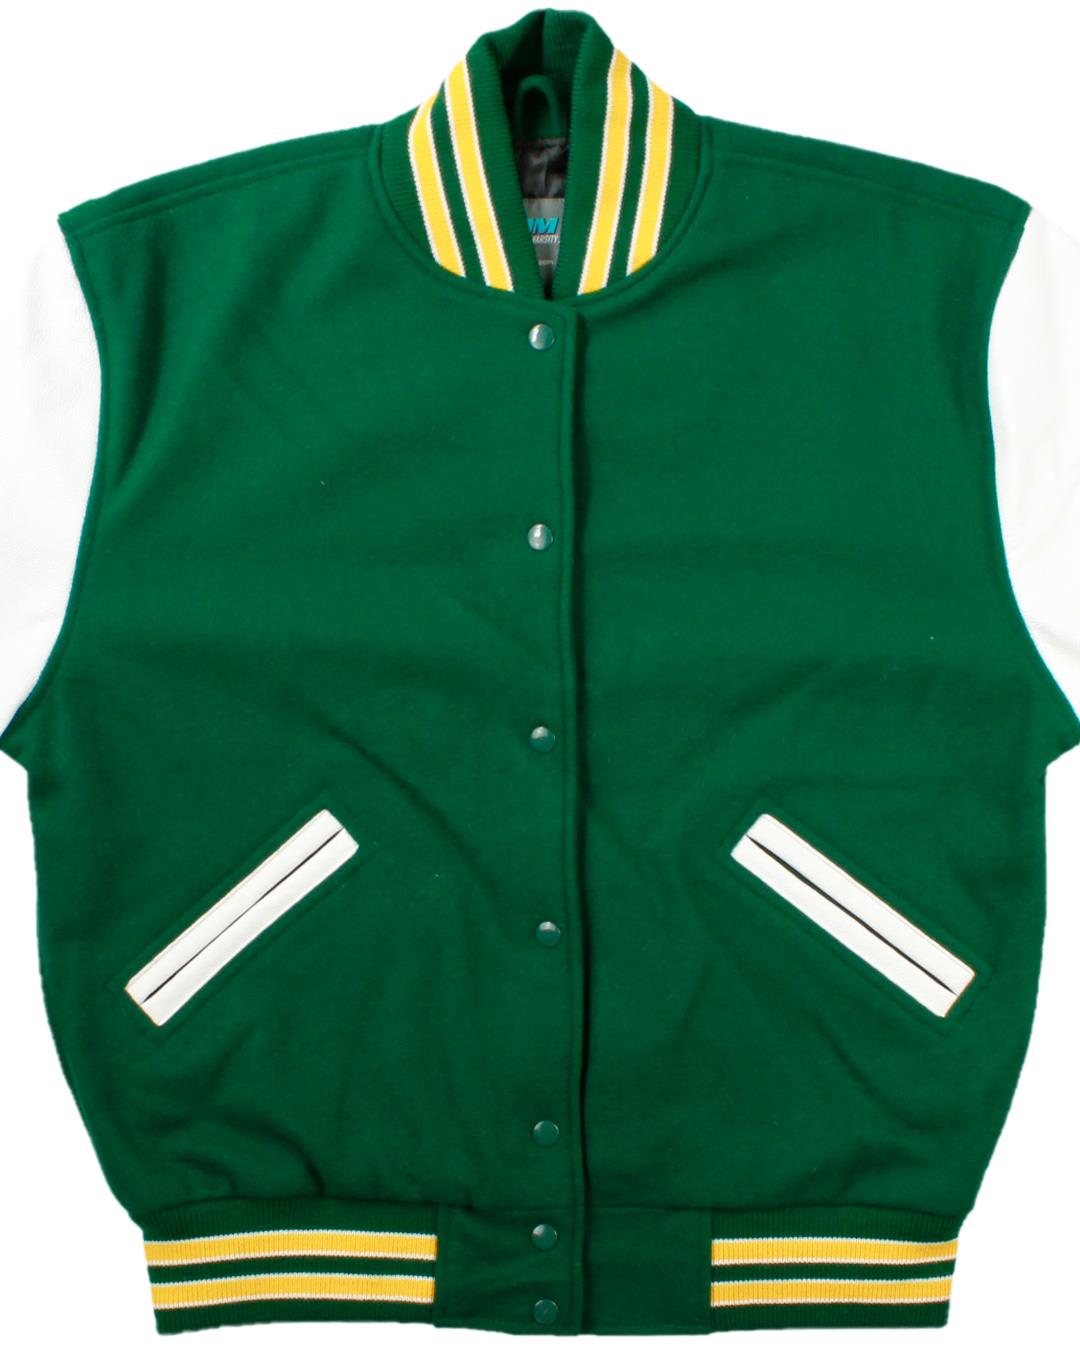 Livermore High School Varsity Jacket, Livermore, CA - Front